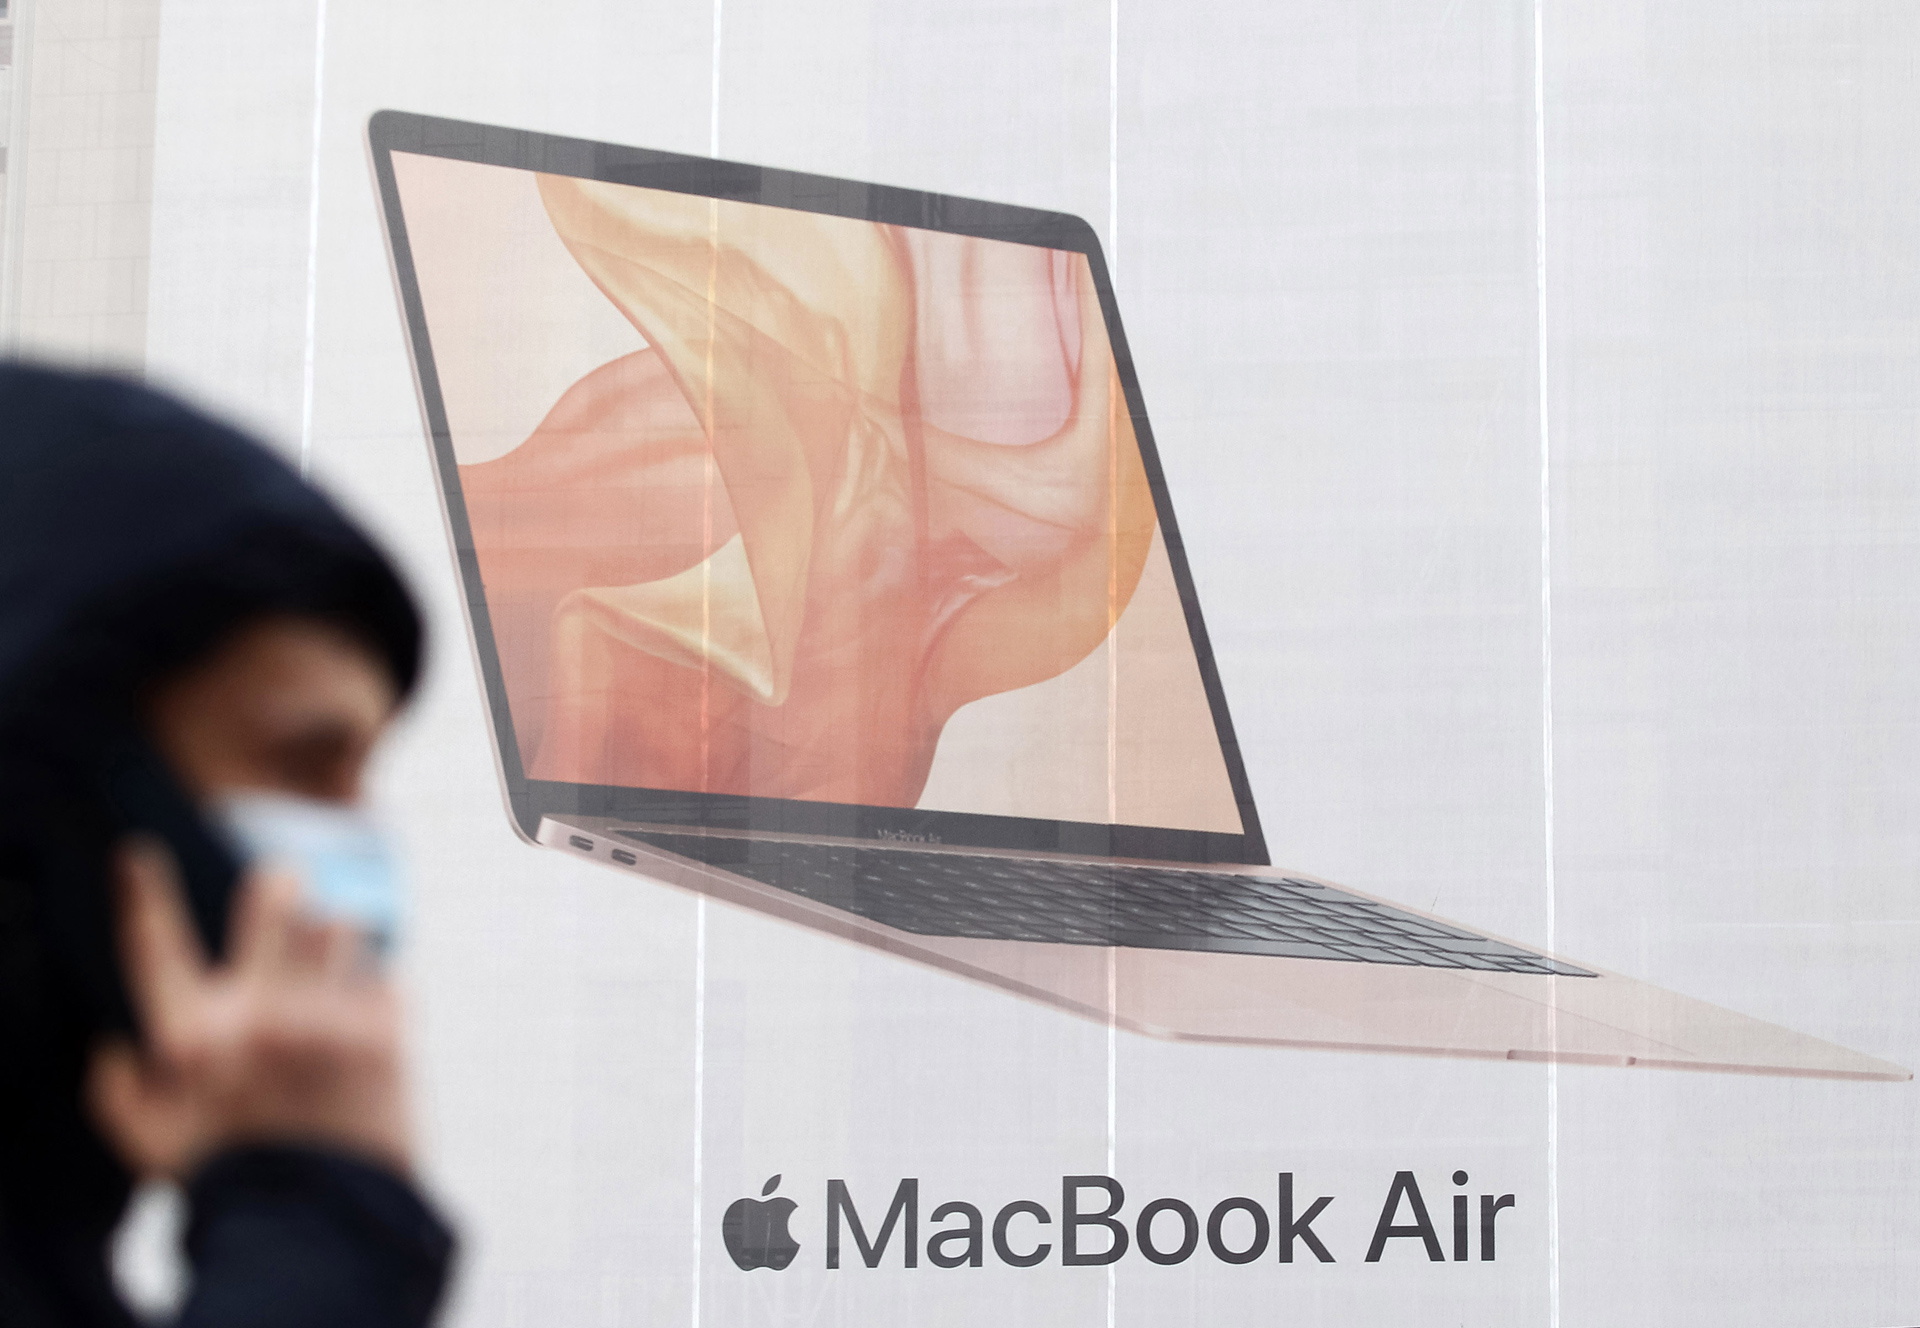 A man wearing a face mask as a preventive measure walks past a Macbook Air by Apple advert